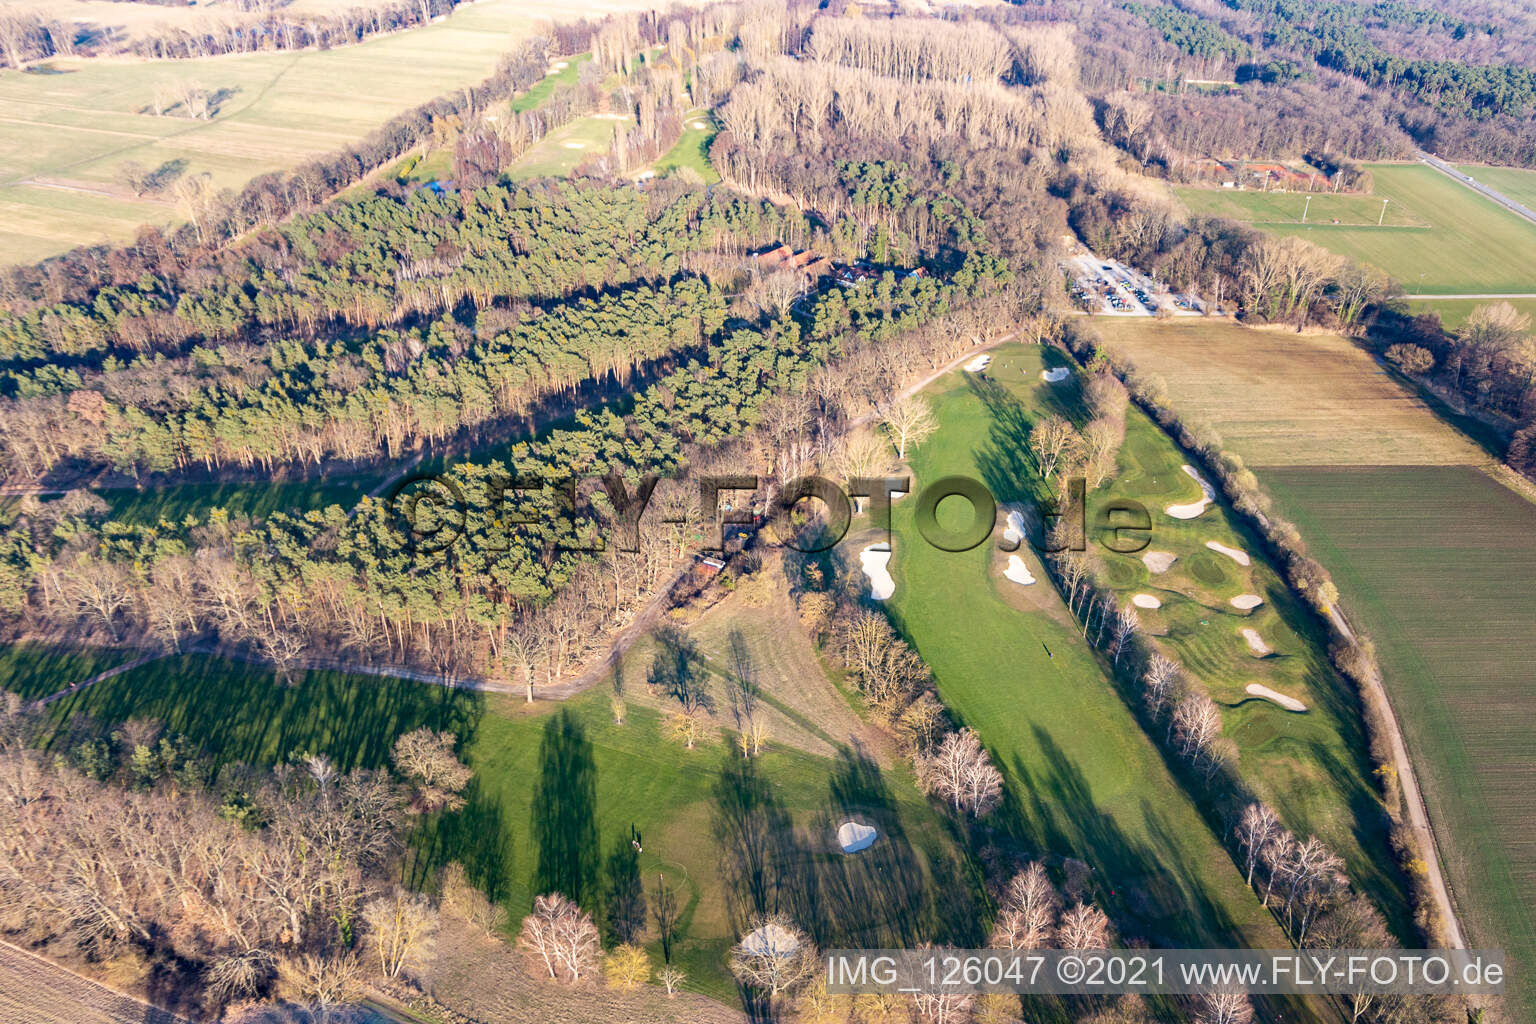 Aerial view of Grounds of the Golf course at Golf-Club Palatinate in the district Geinsheim in Neustadt an der Weinstrasse in the state Rhineland-Palatinate